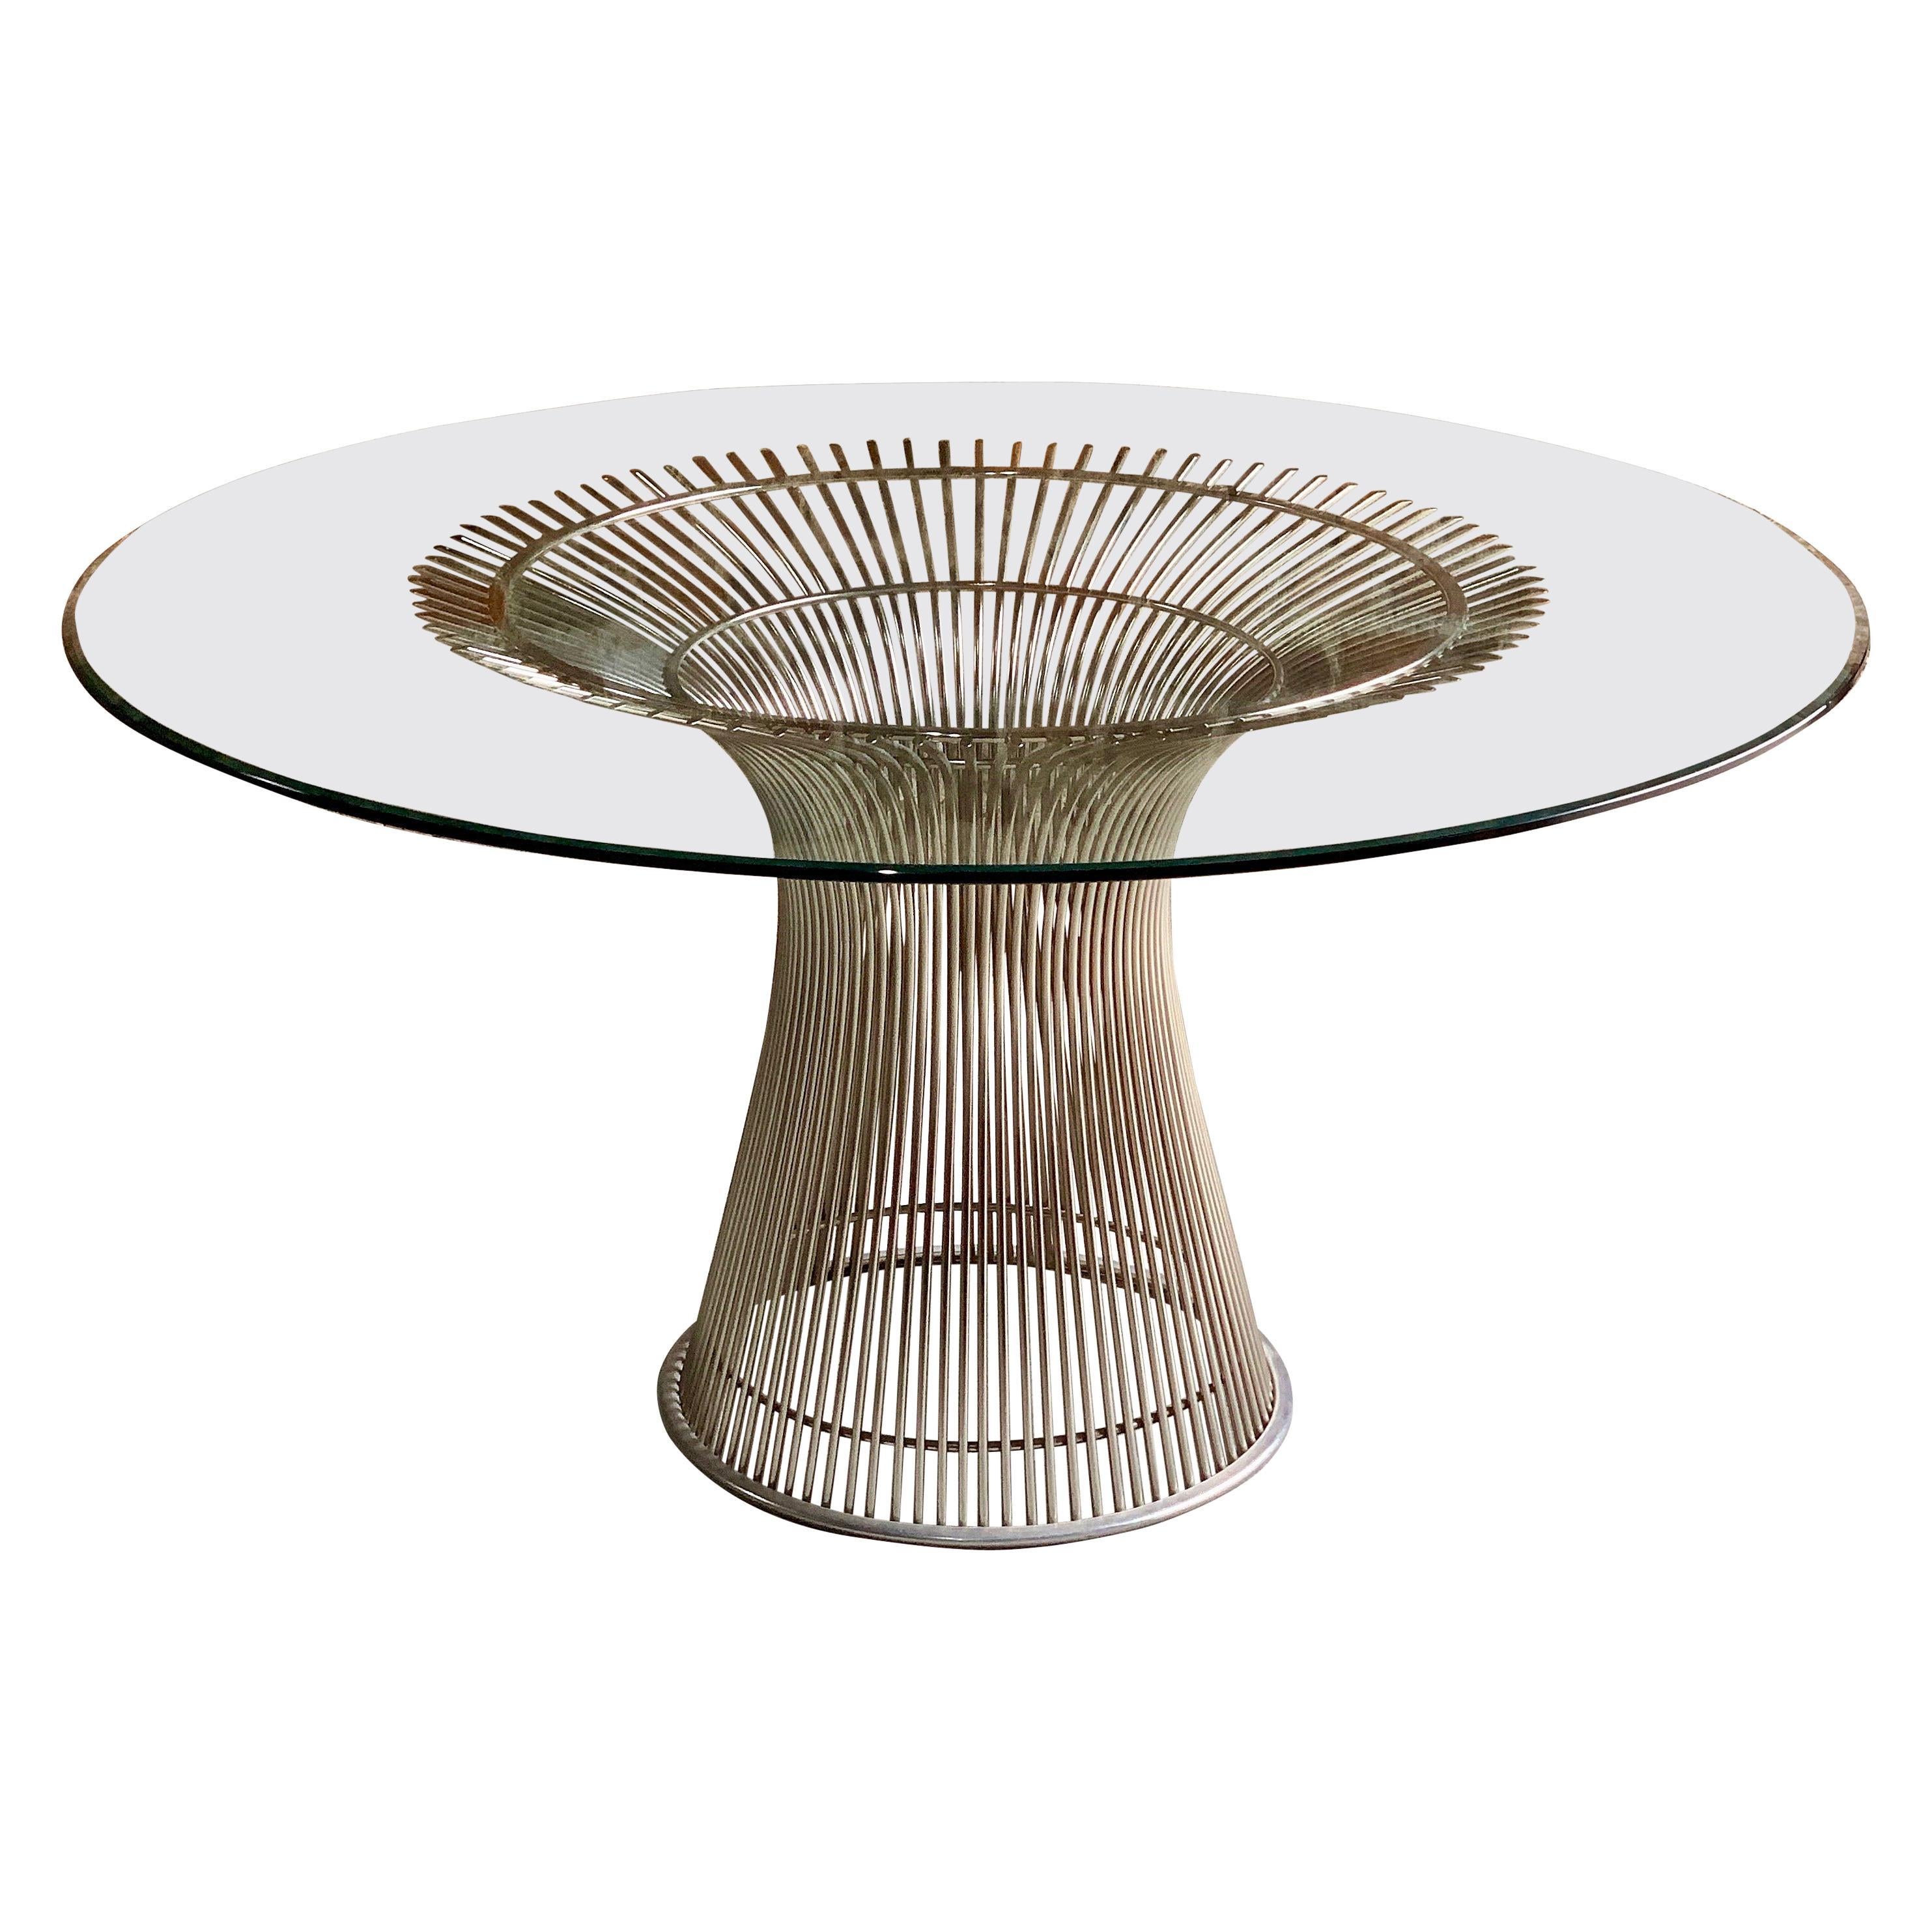 Mid-Century Modern Warren Platner Dining Table & 6 Brno Chairs by Mies van der Rohe by Knoll Studio